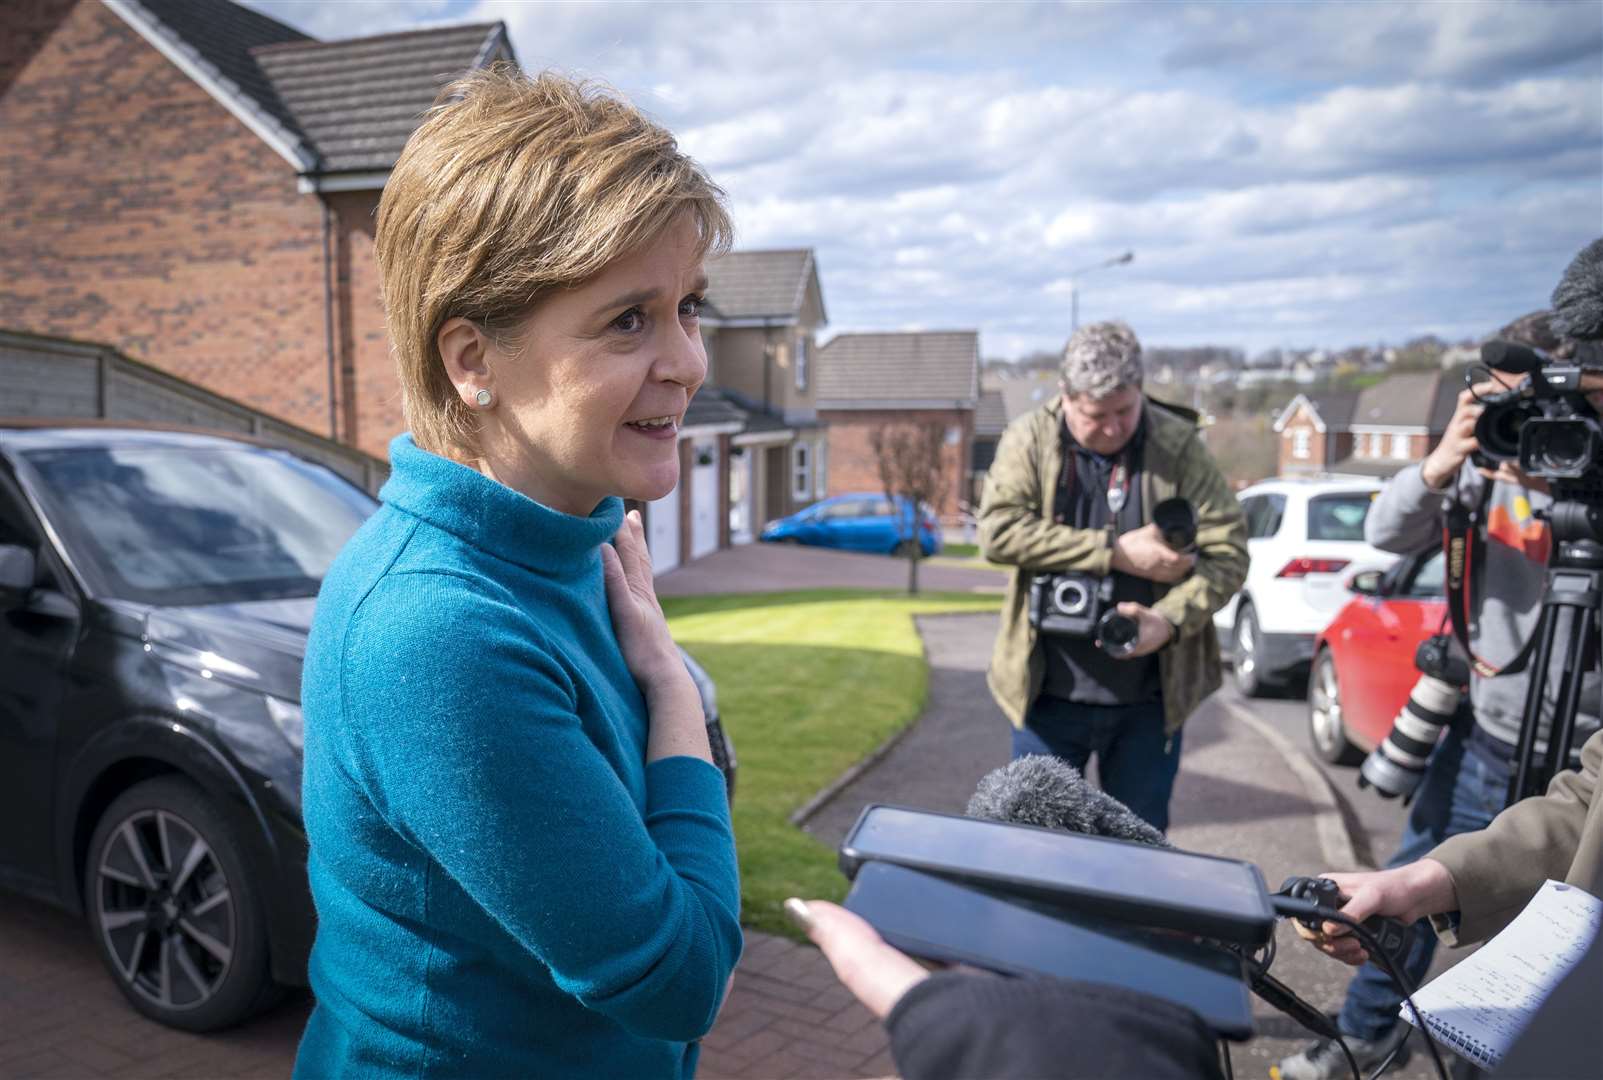 Ms Sturgeon’s husband Peter Murrell was released without charge after his arrest on Wednesday (Jane Barlow/PA)